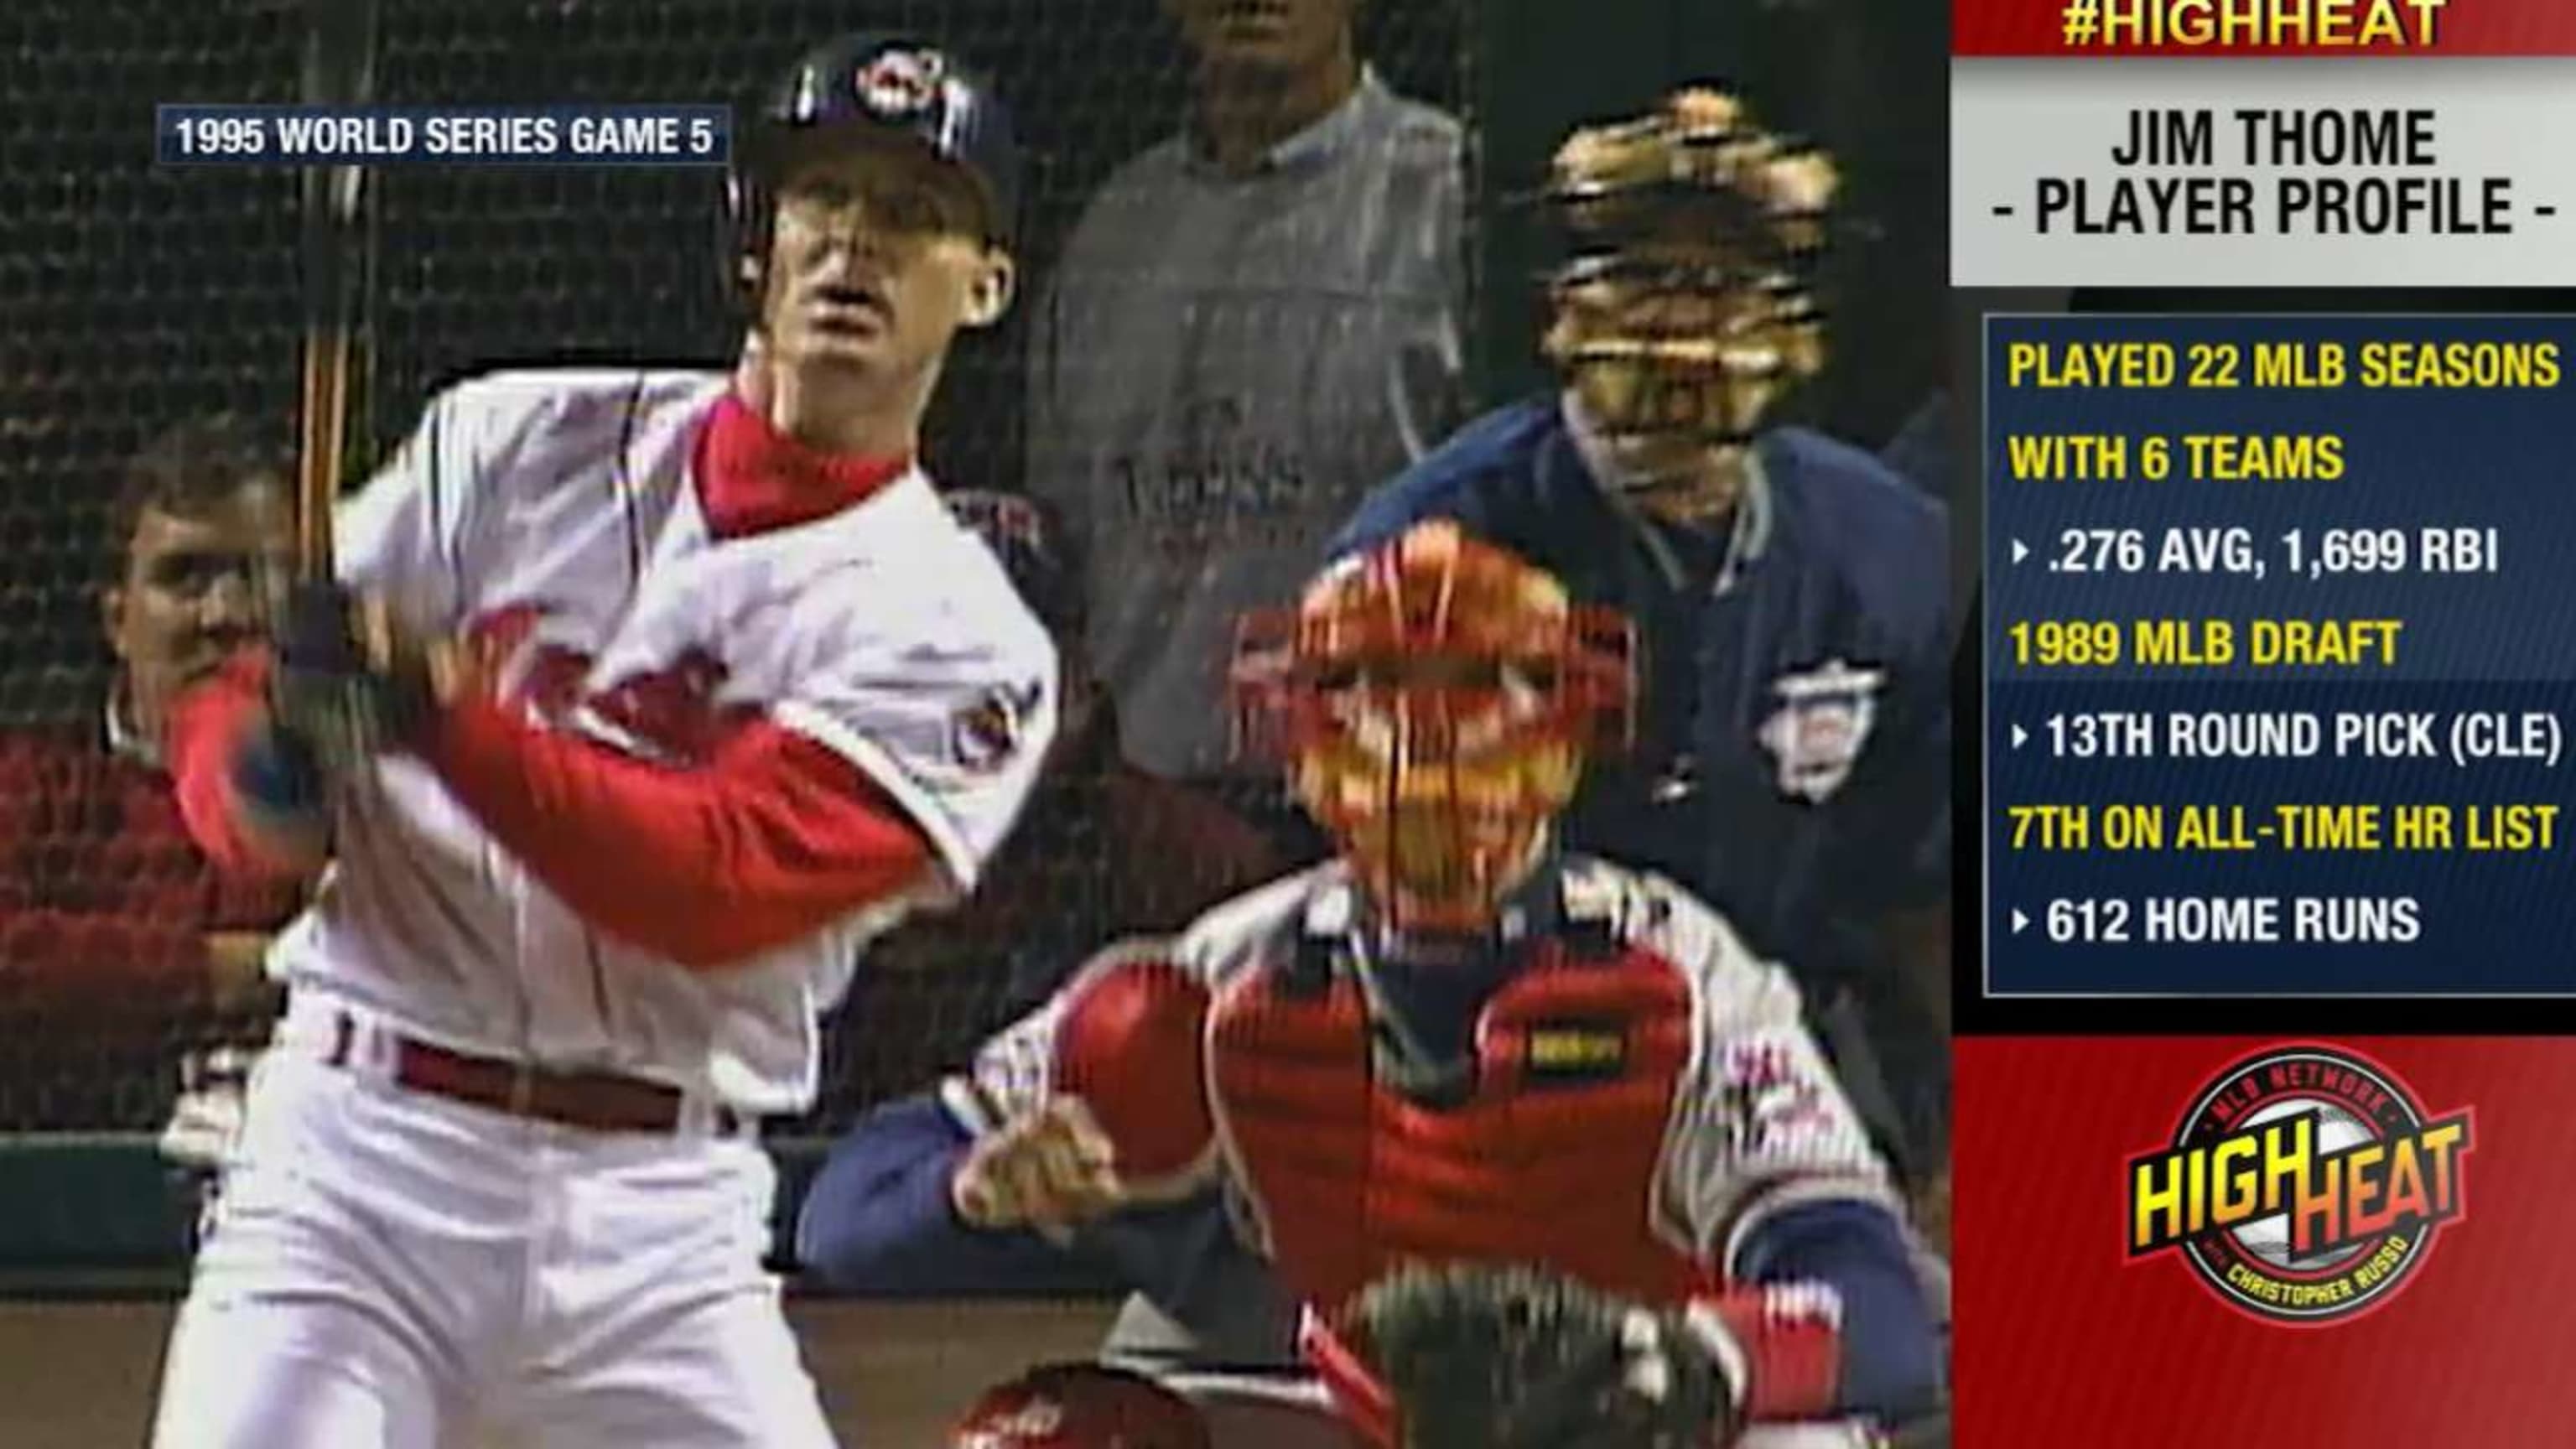 Indians at center of Thome's HOF career